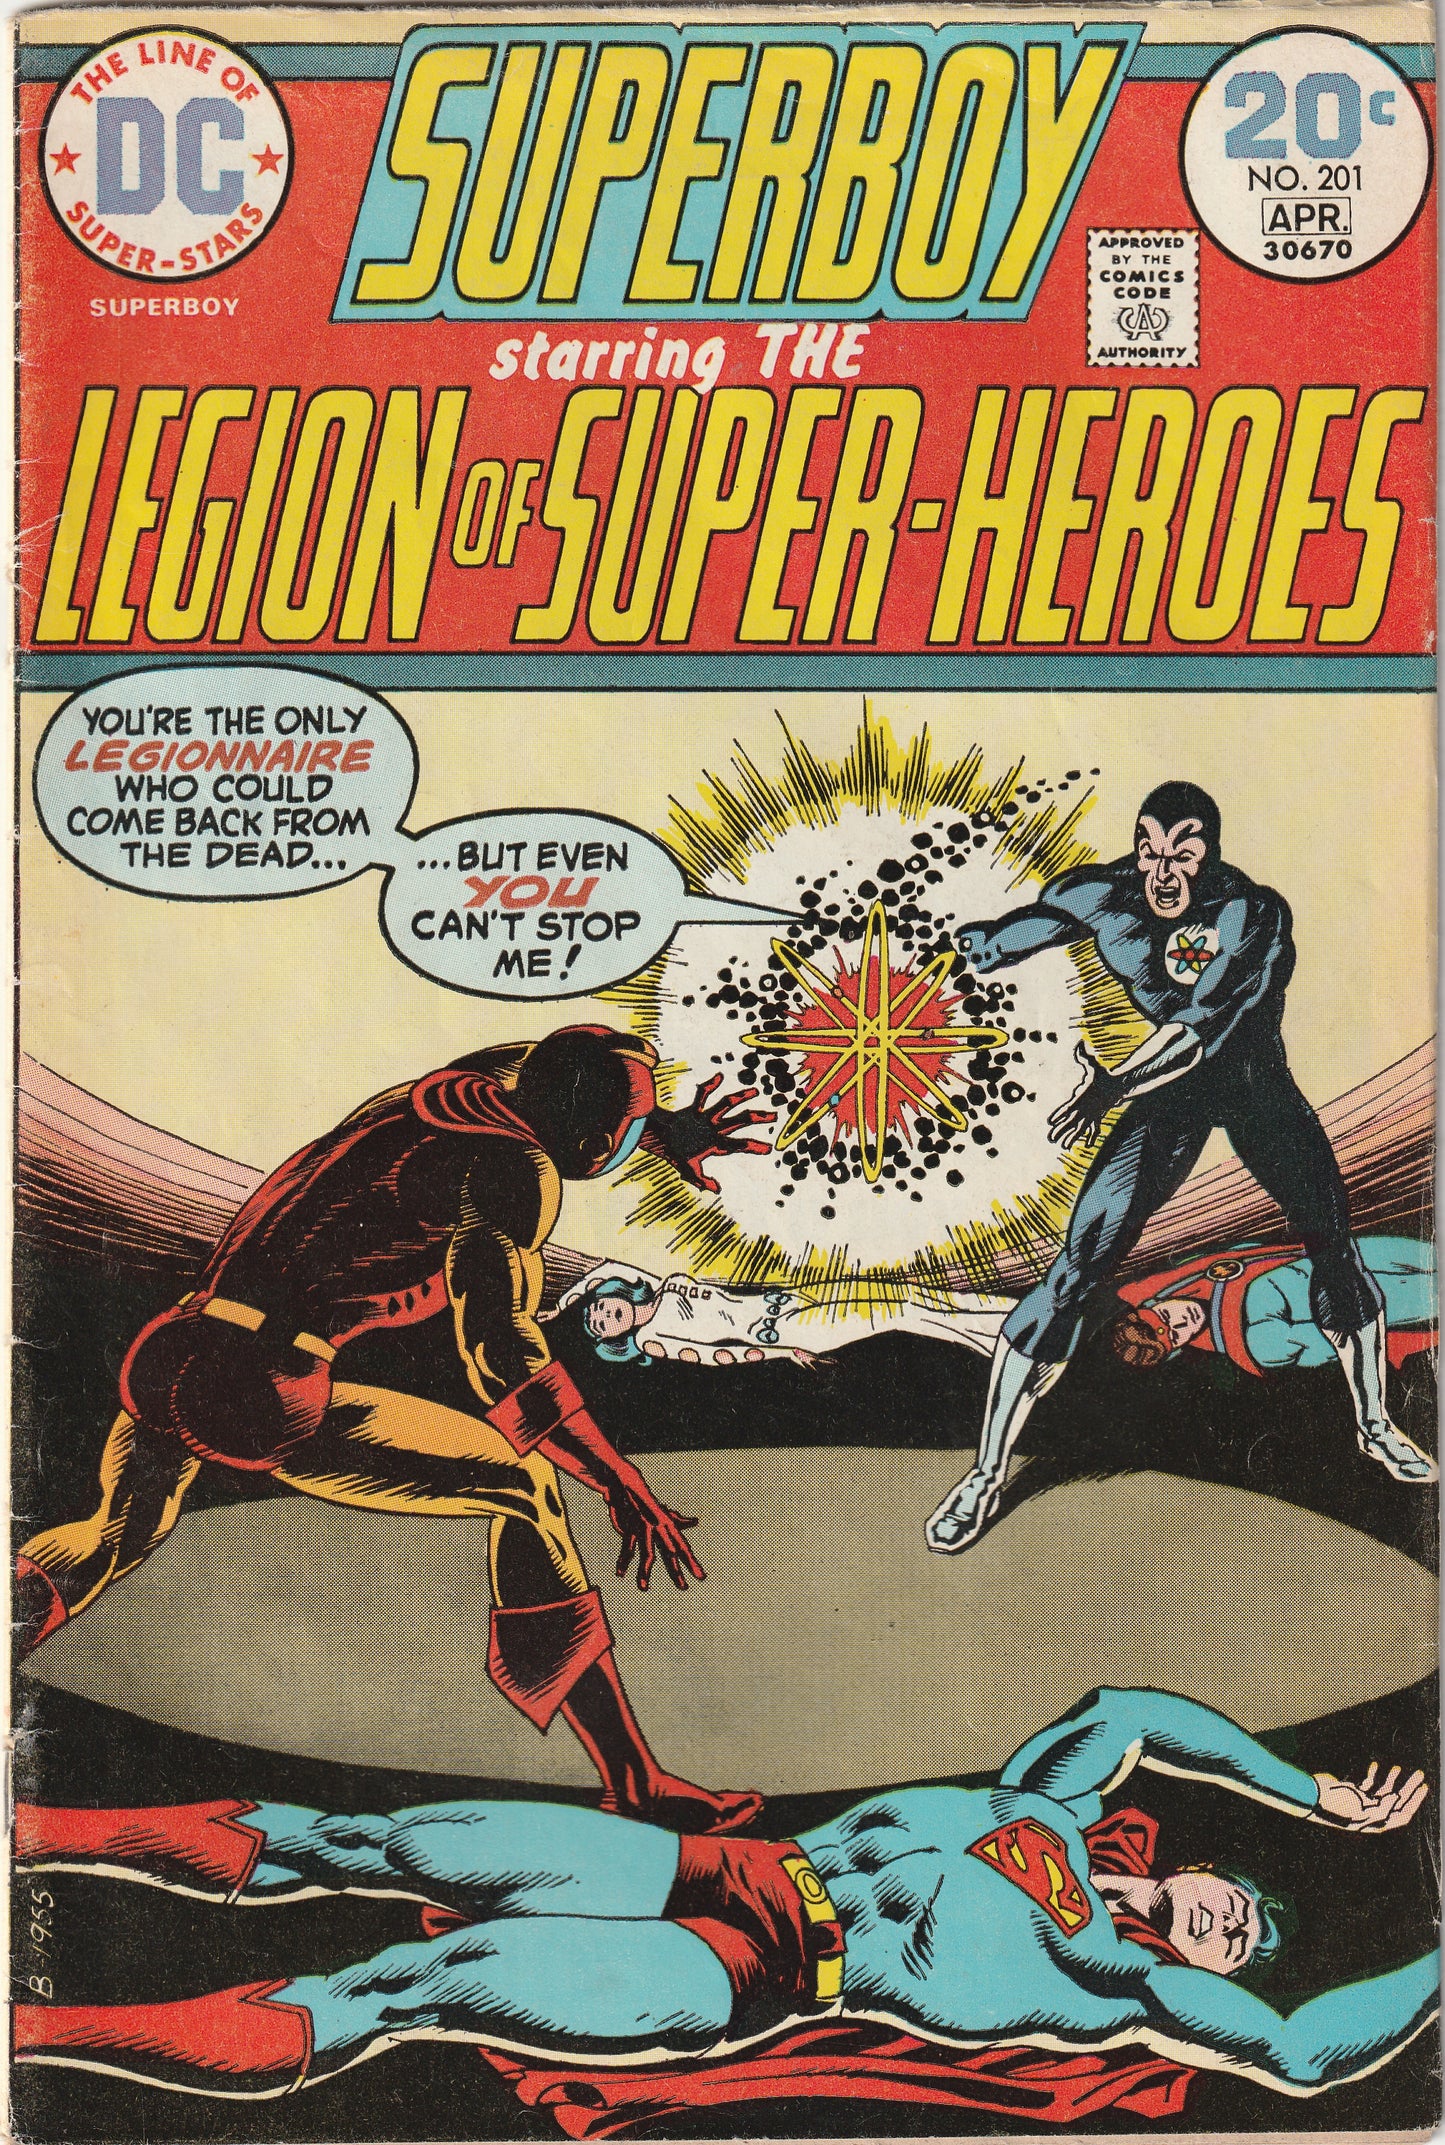 Superboy #201 (1974) - Starring the Legion of Super-Heroes